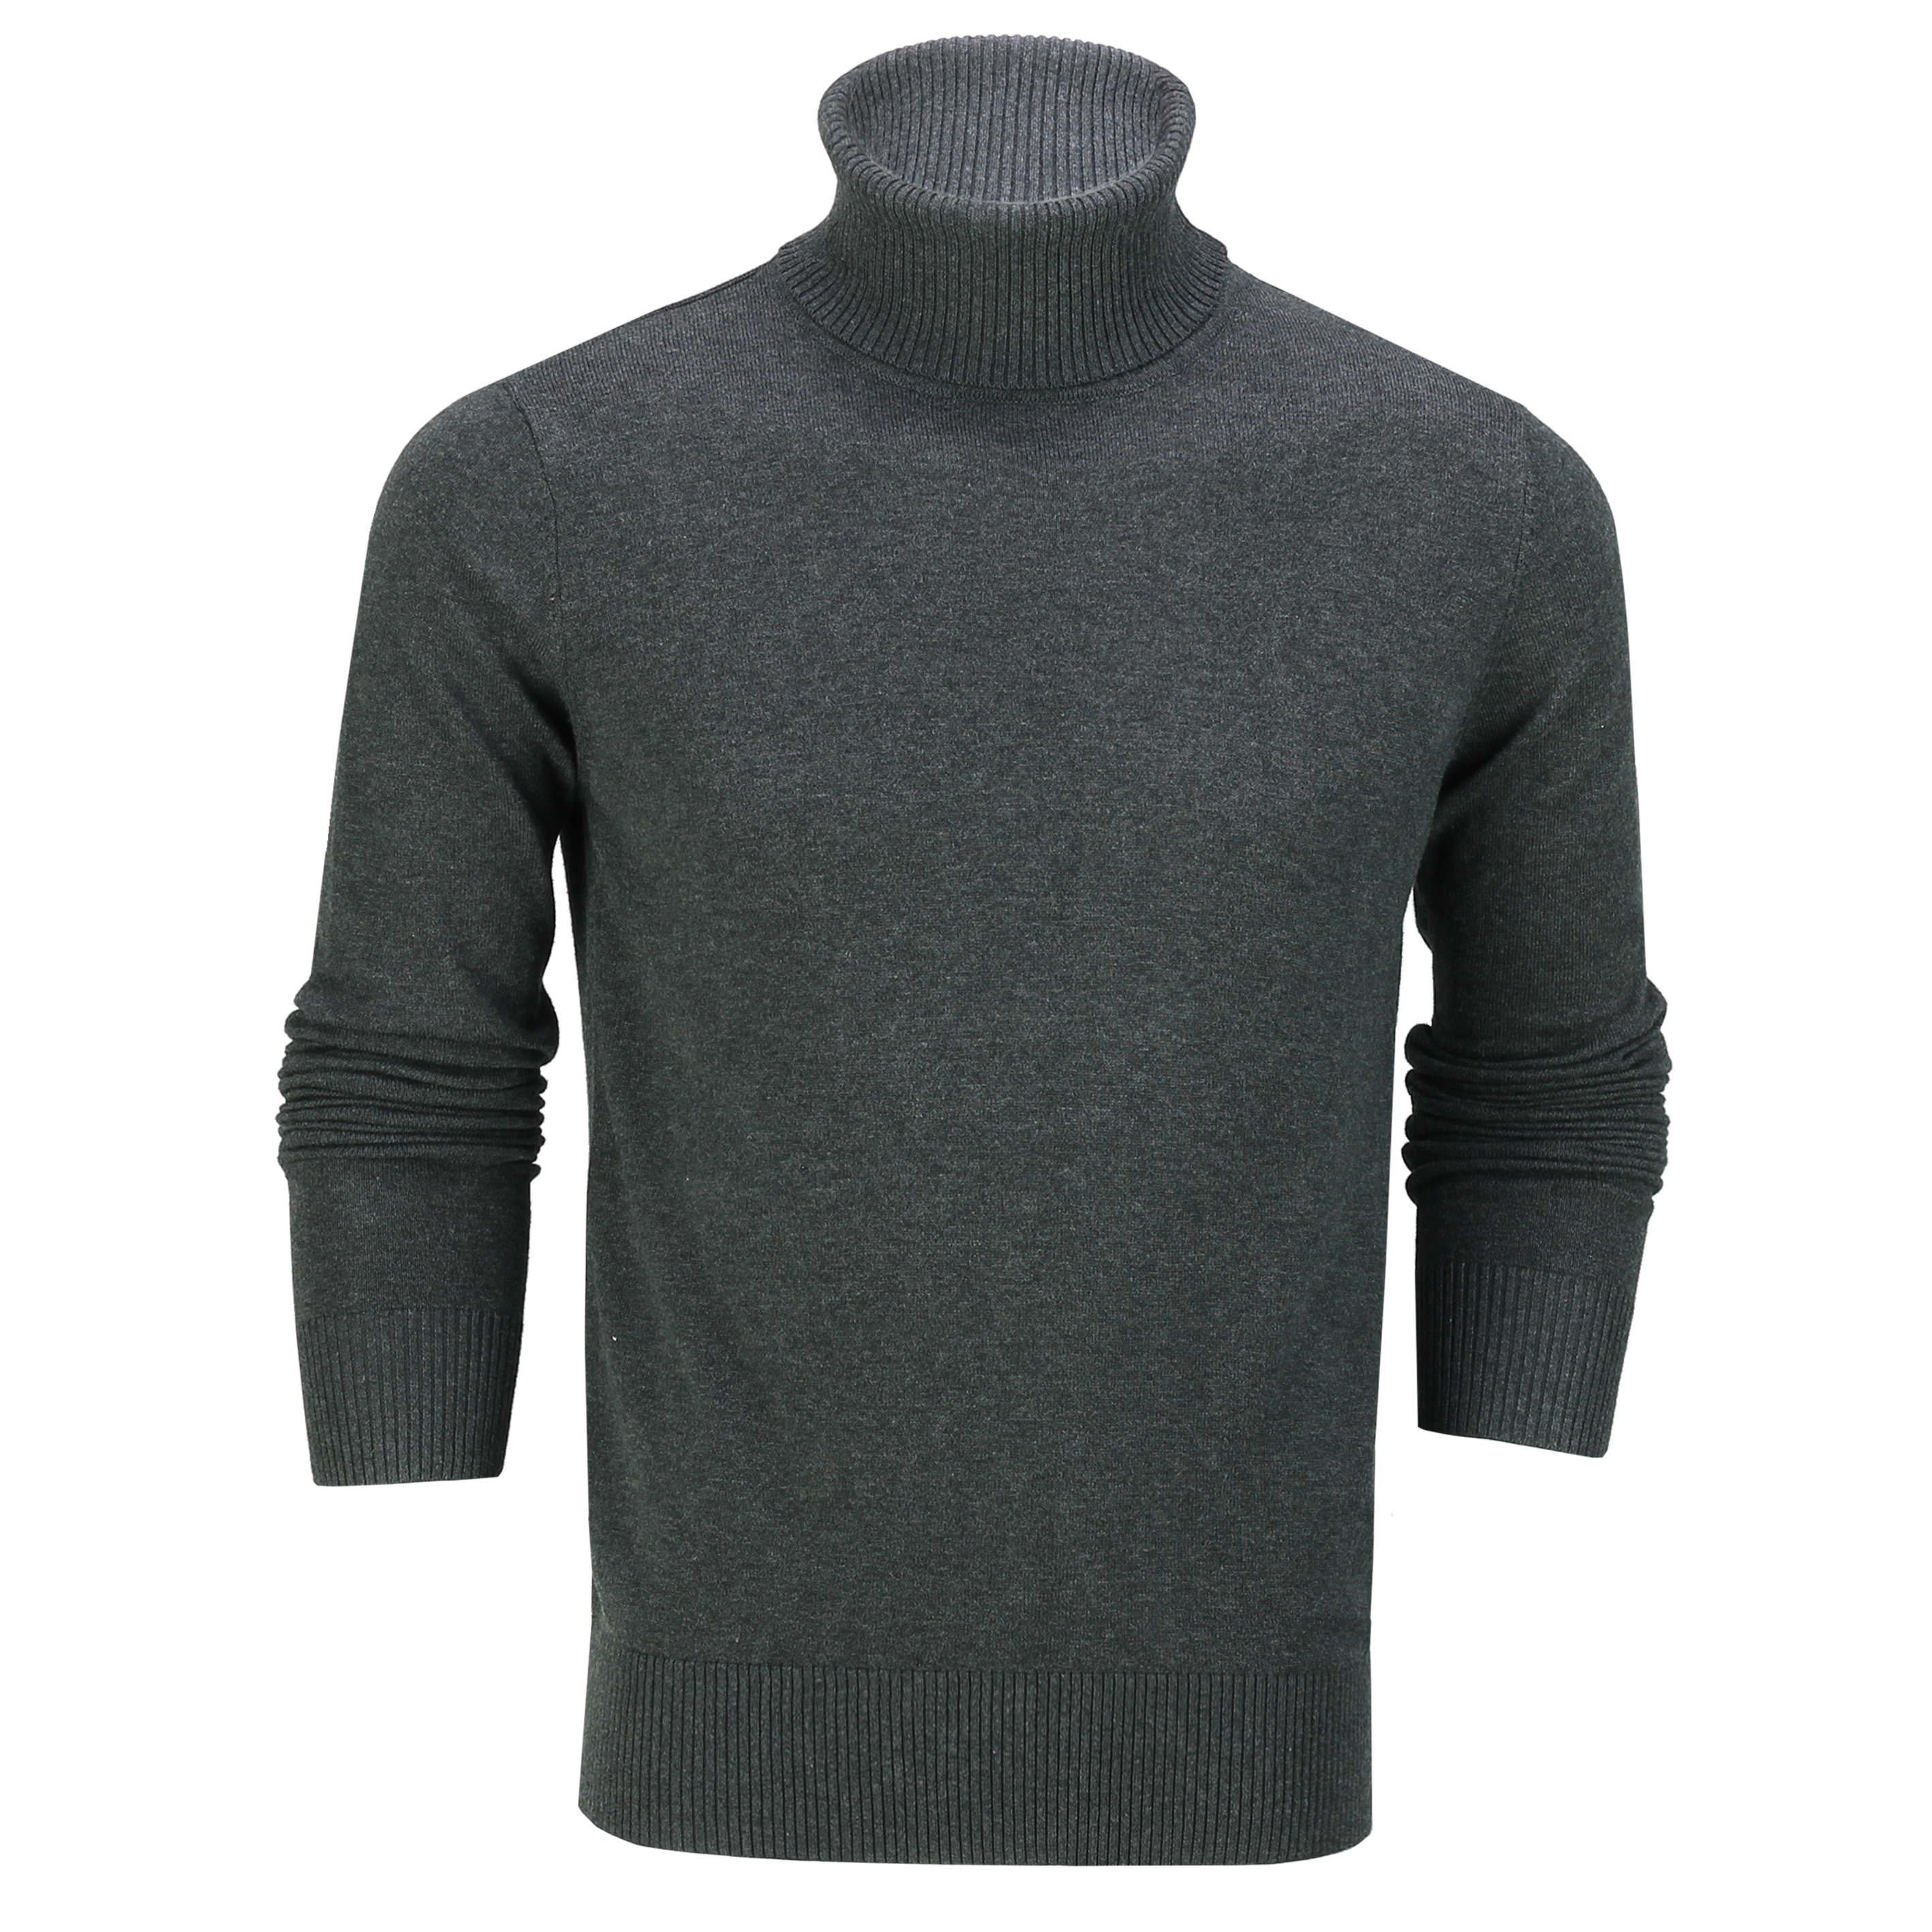 Mens Roll Neck Grey Jumper Soft Cotton Fine Knitted